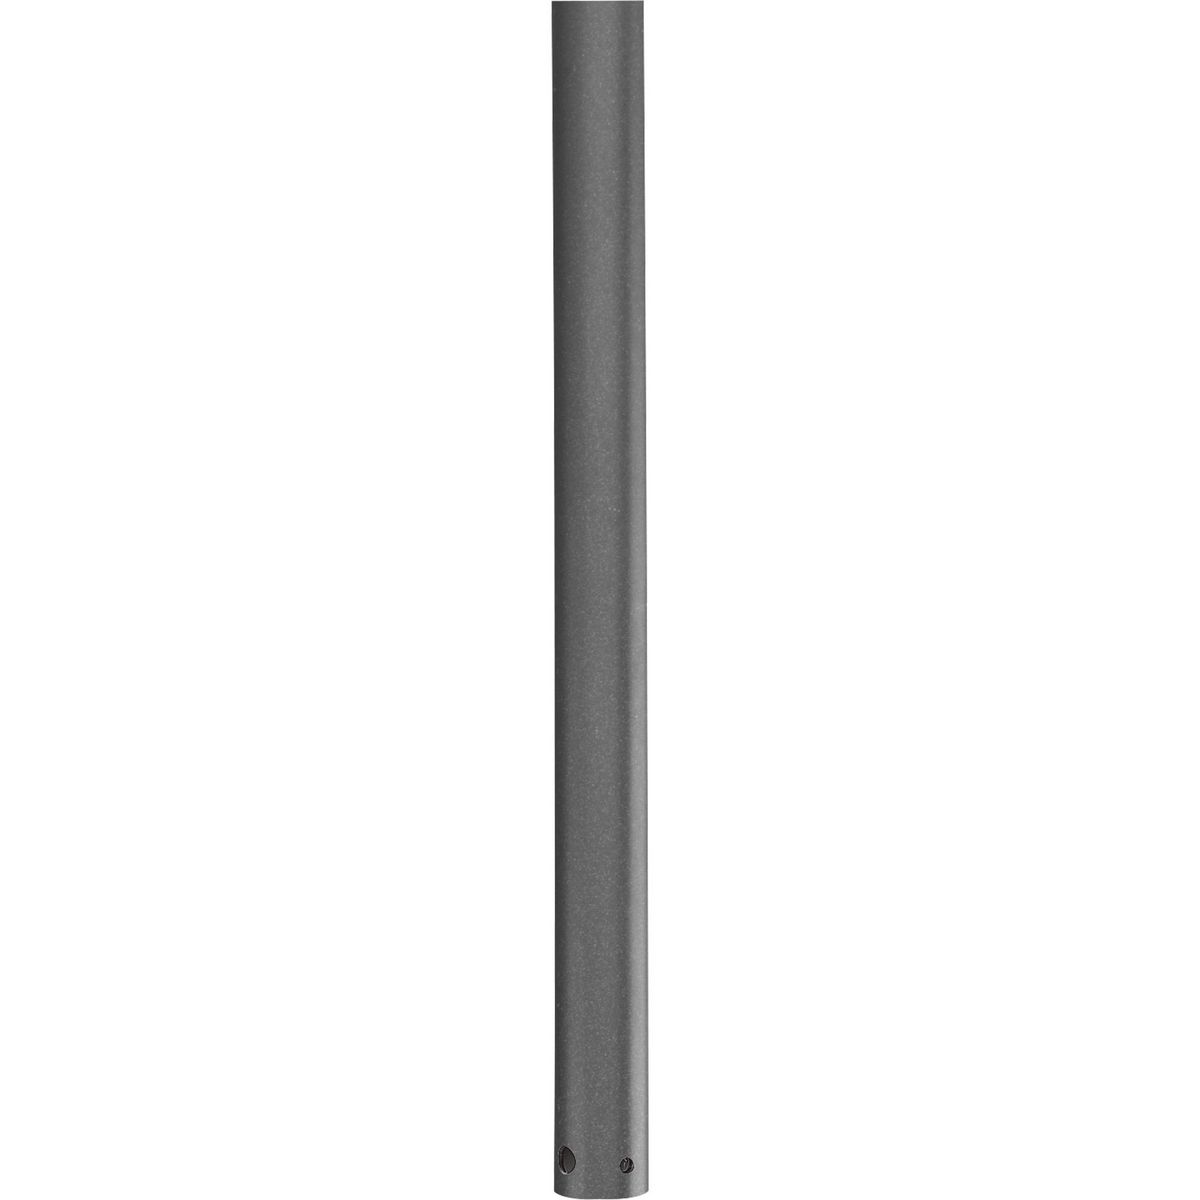 3/4 In. x 12 In. downrod for use with any Progress Lighting ceiling fan. Use of a fan downrod positions your ceiling fan at the optimal height for air circulation and provides the perfect solution for installation on high cathedral ceilings or in gre...